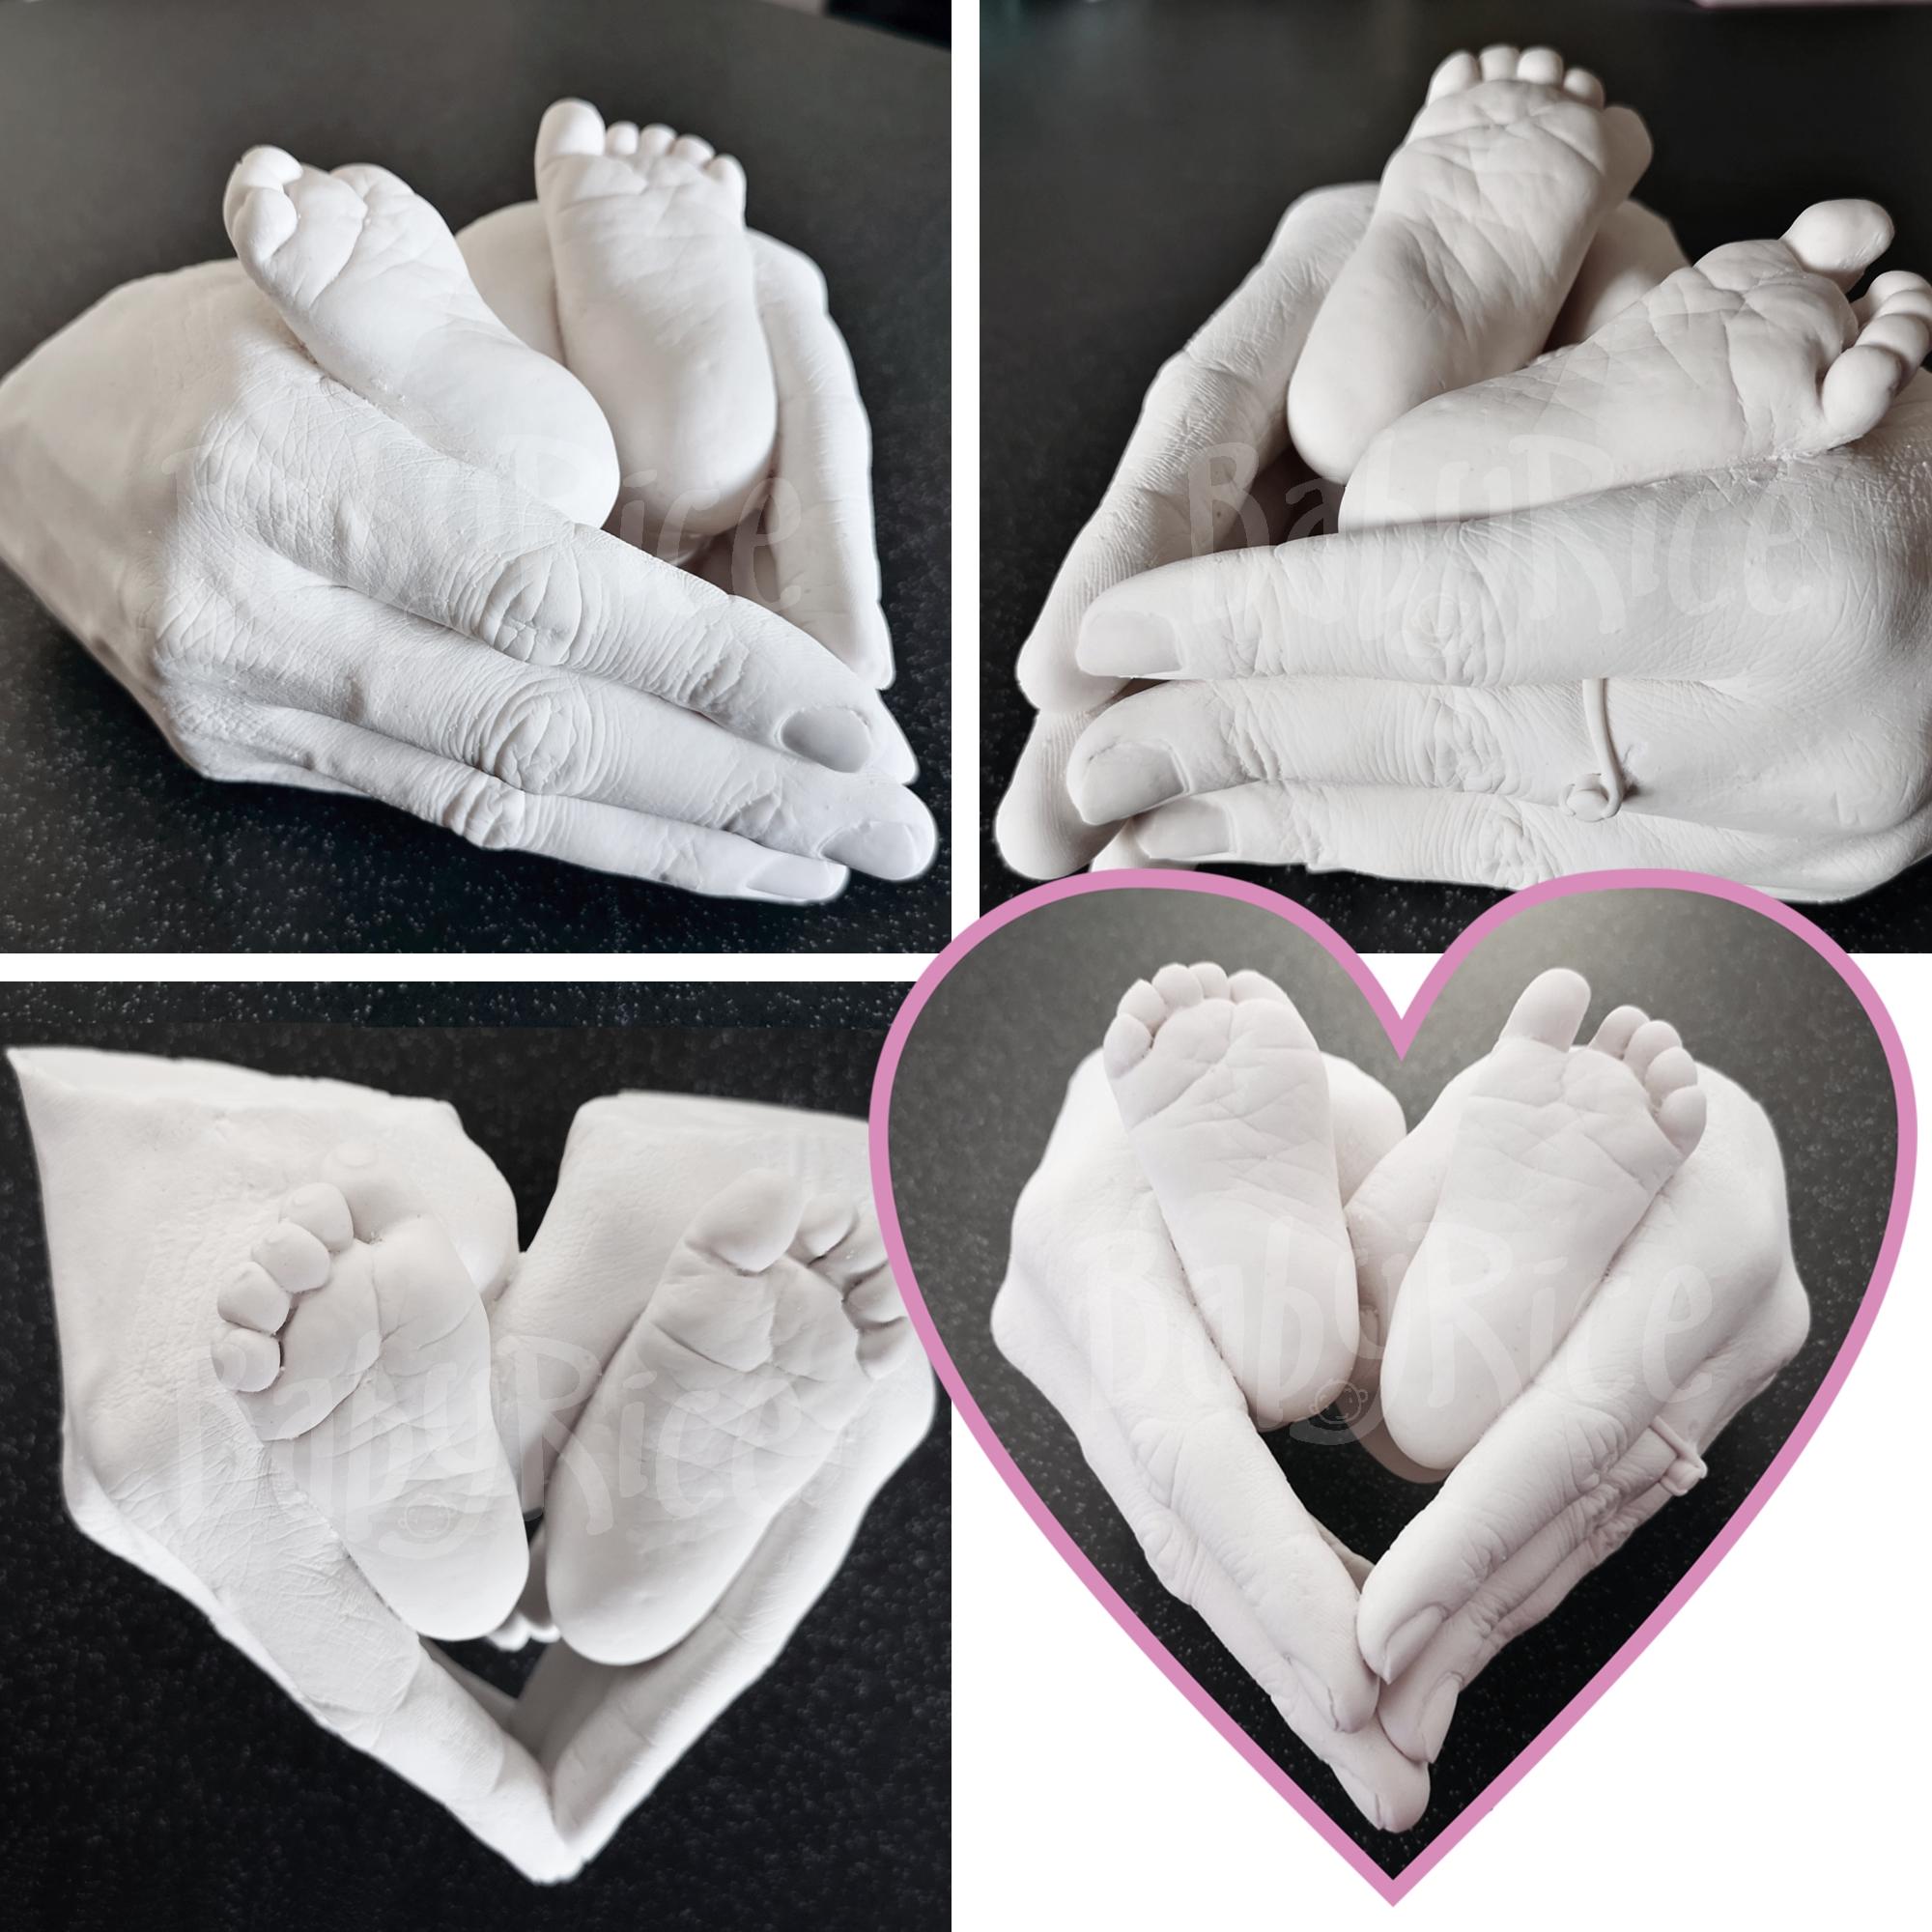 Discovering DIY Hand Casting Kit - Couples Gifts for Him or Her, Father's  Day Gifts, Kids and Family Gifts & DIY Craft Kits for Adults - Plaster Hand  Mold Kit w/Gloves, Paints